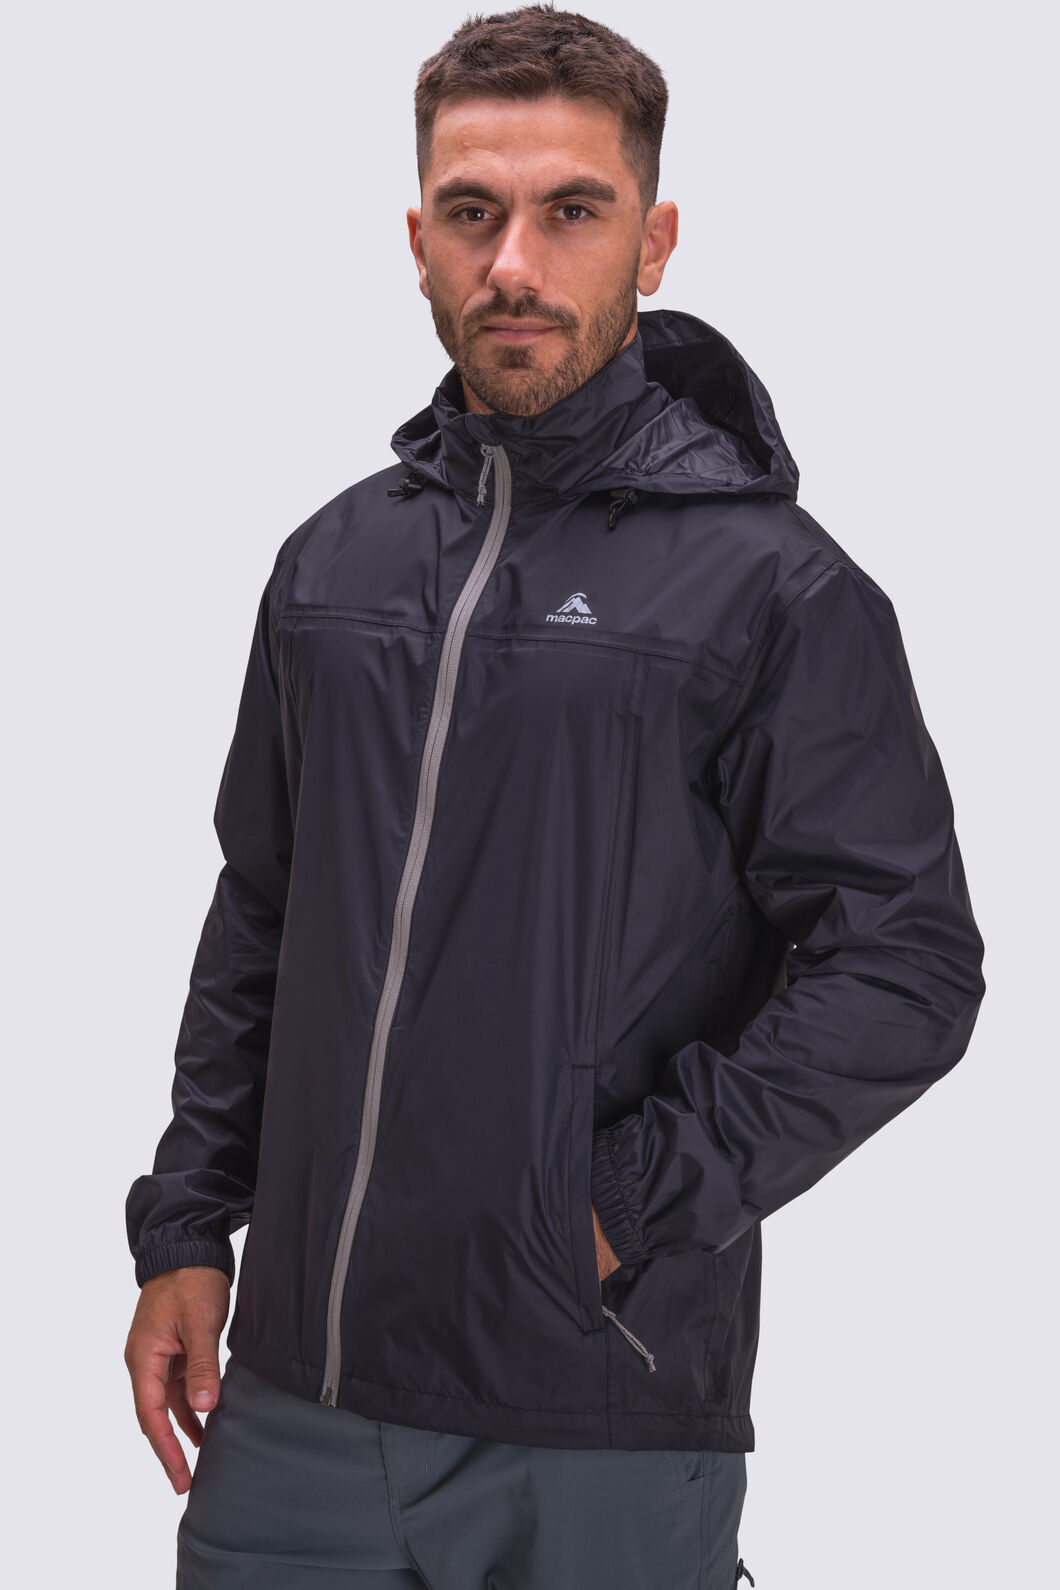 Unlock Wilderness' choice in the Macpac Vs Patagonia comparison, the Pack-It Jacket by Macpac